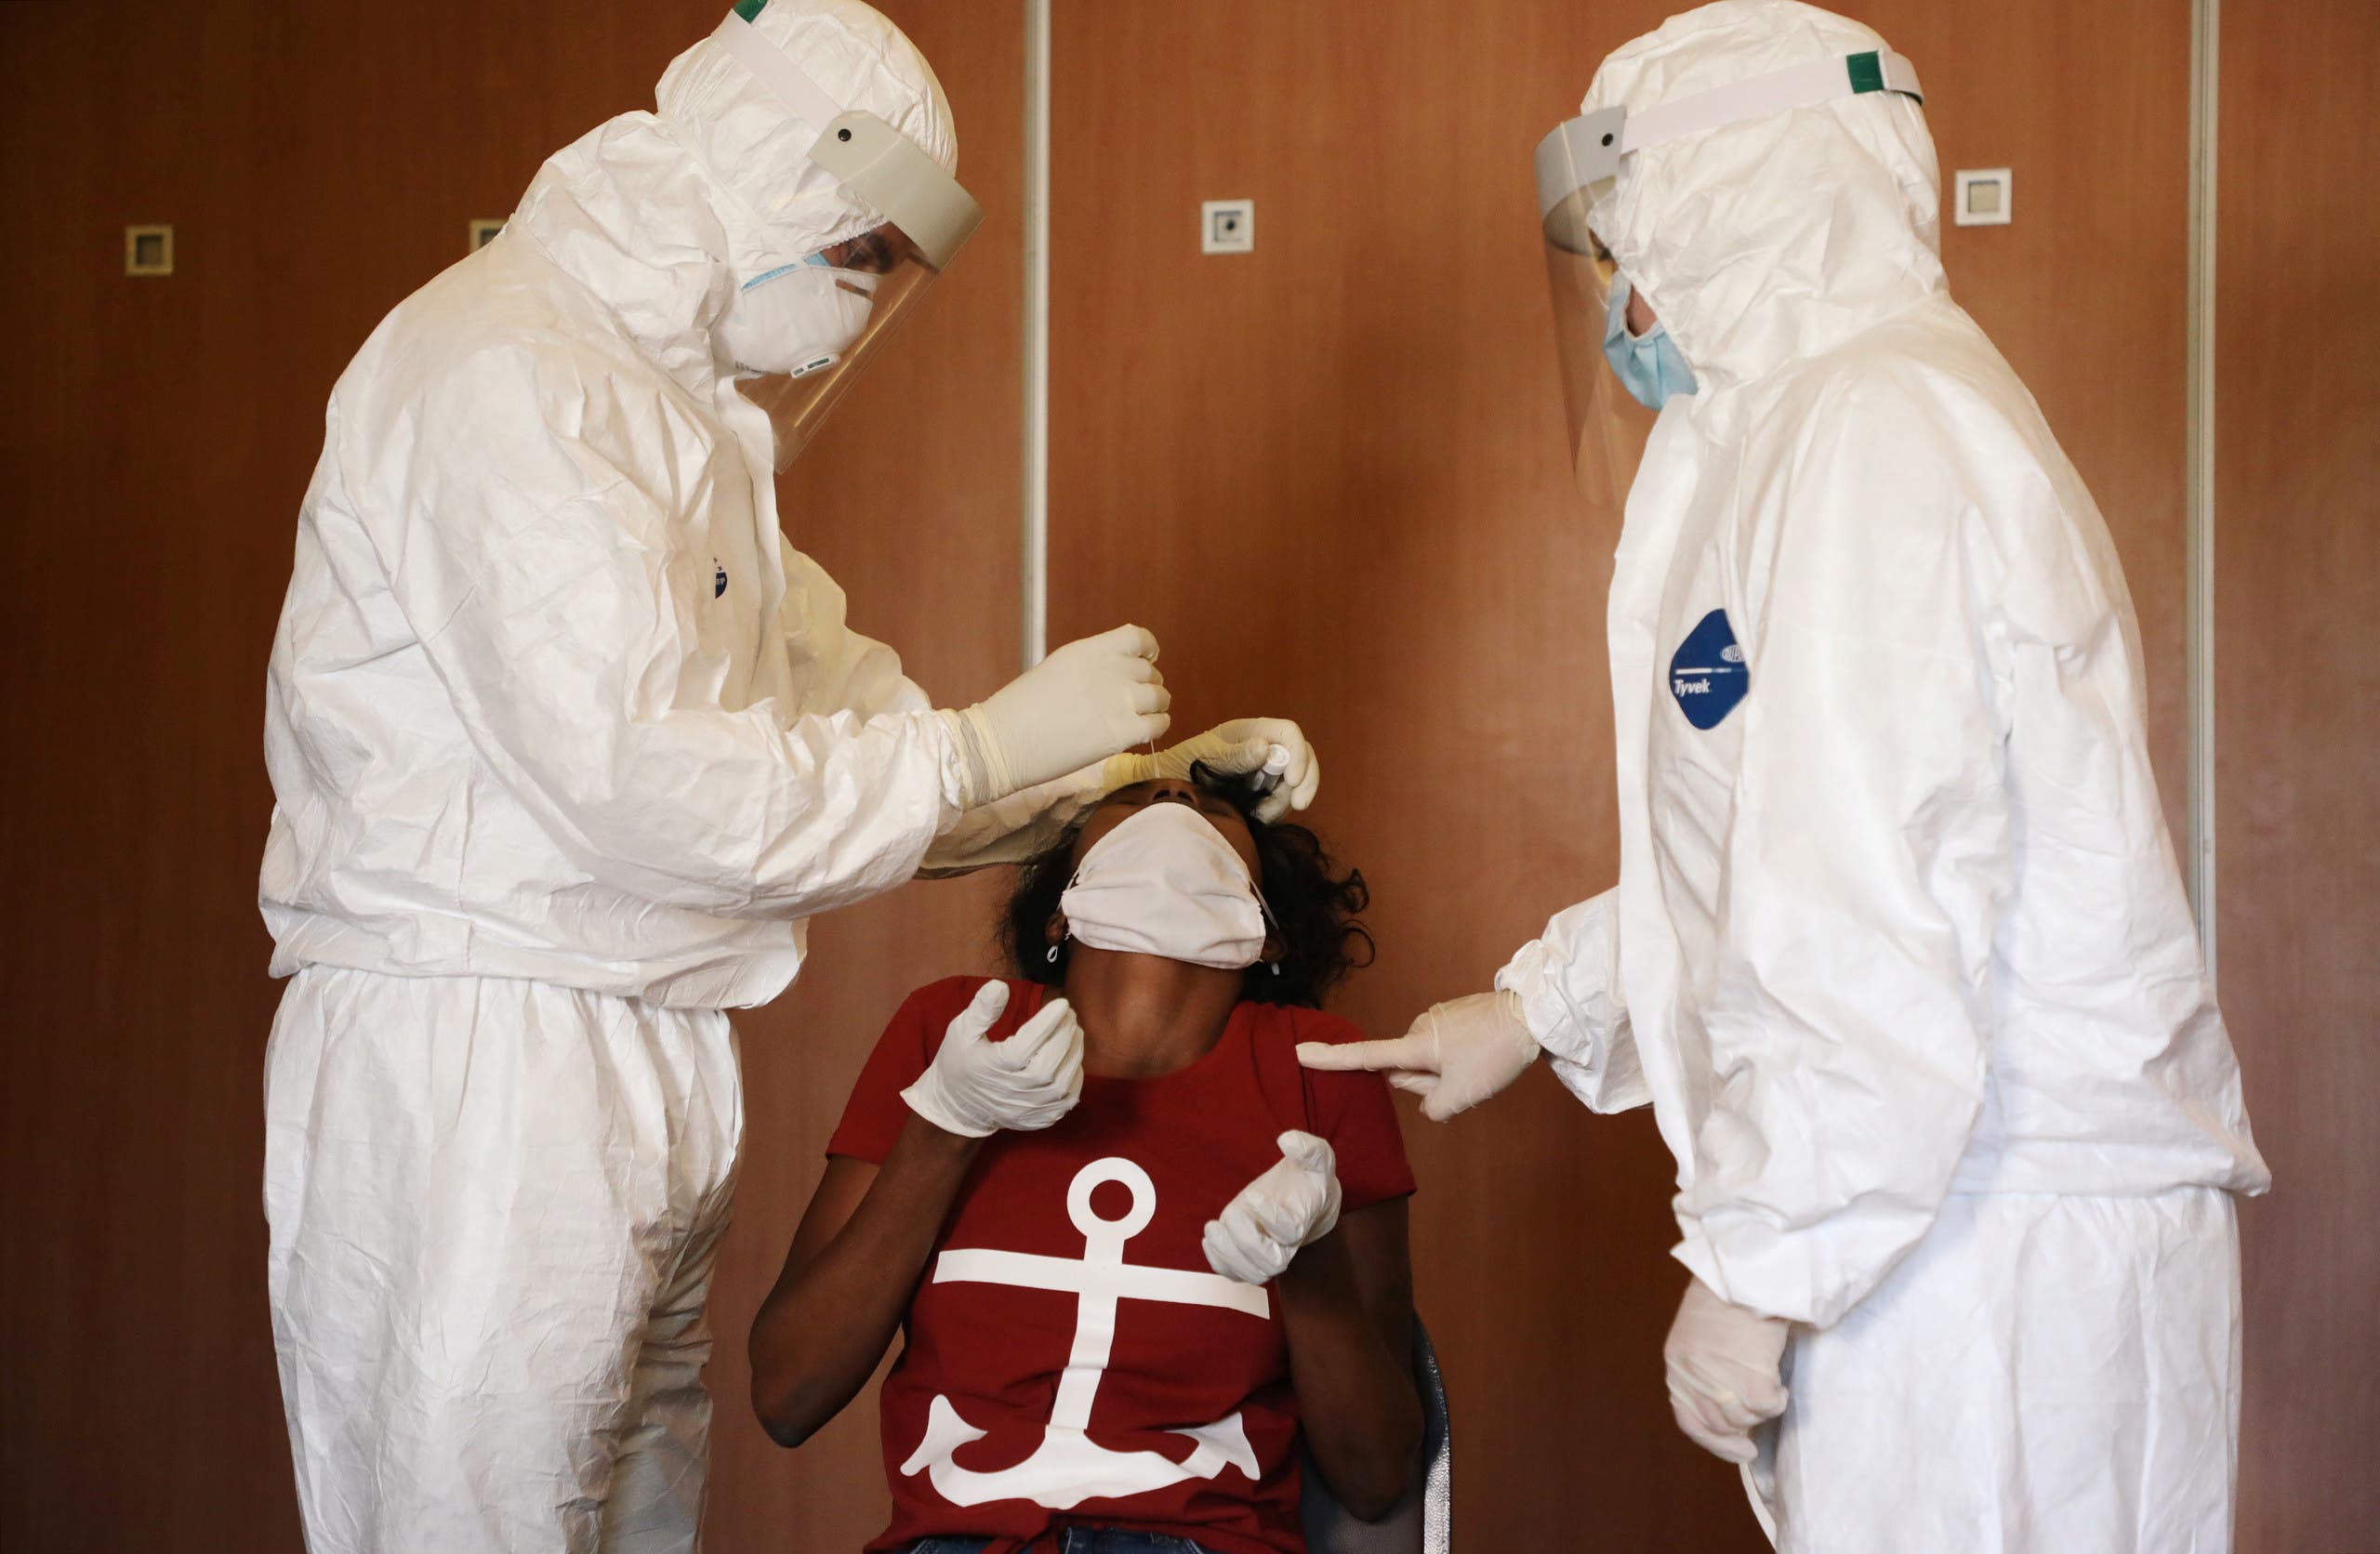 Health workers test a migrant domestic worker from Africa for the coronavirus disease (COVID-19) at a hotel, before she travels back to her country, in Beirut suburbs, Lebanon October 5, 2020. Picture taken October 5, 2020. (Reuters)